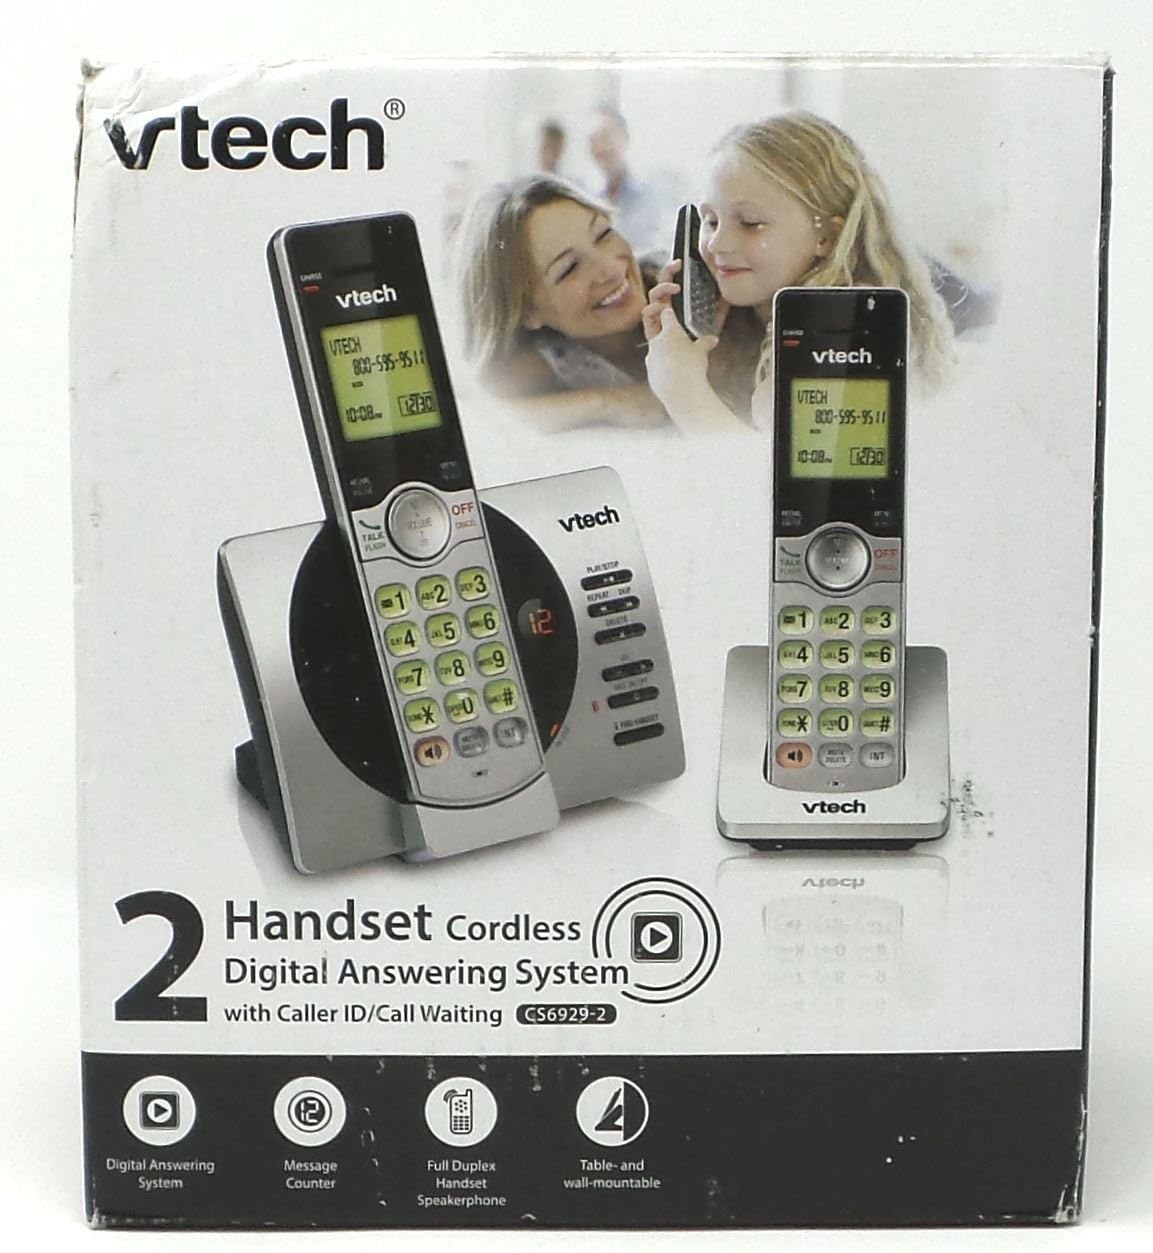 VTech CS6929-2 Cordless Phone with Answering System [...]